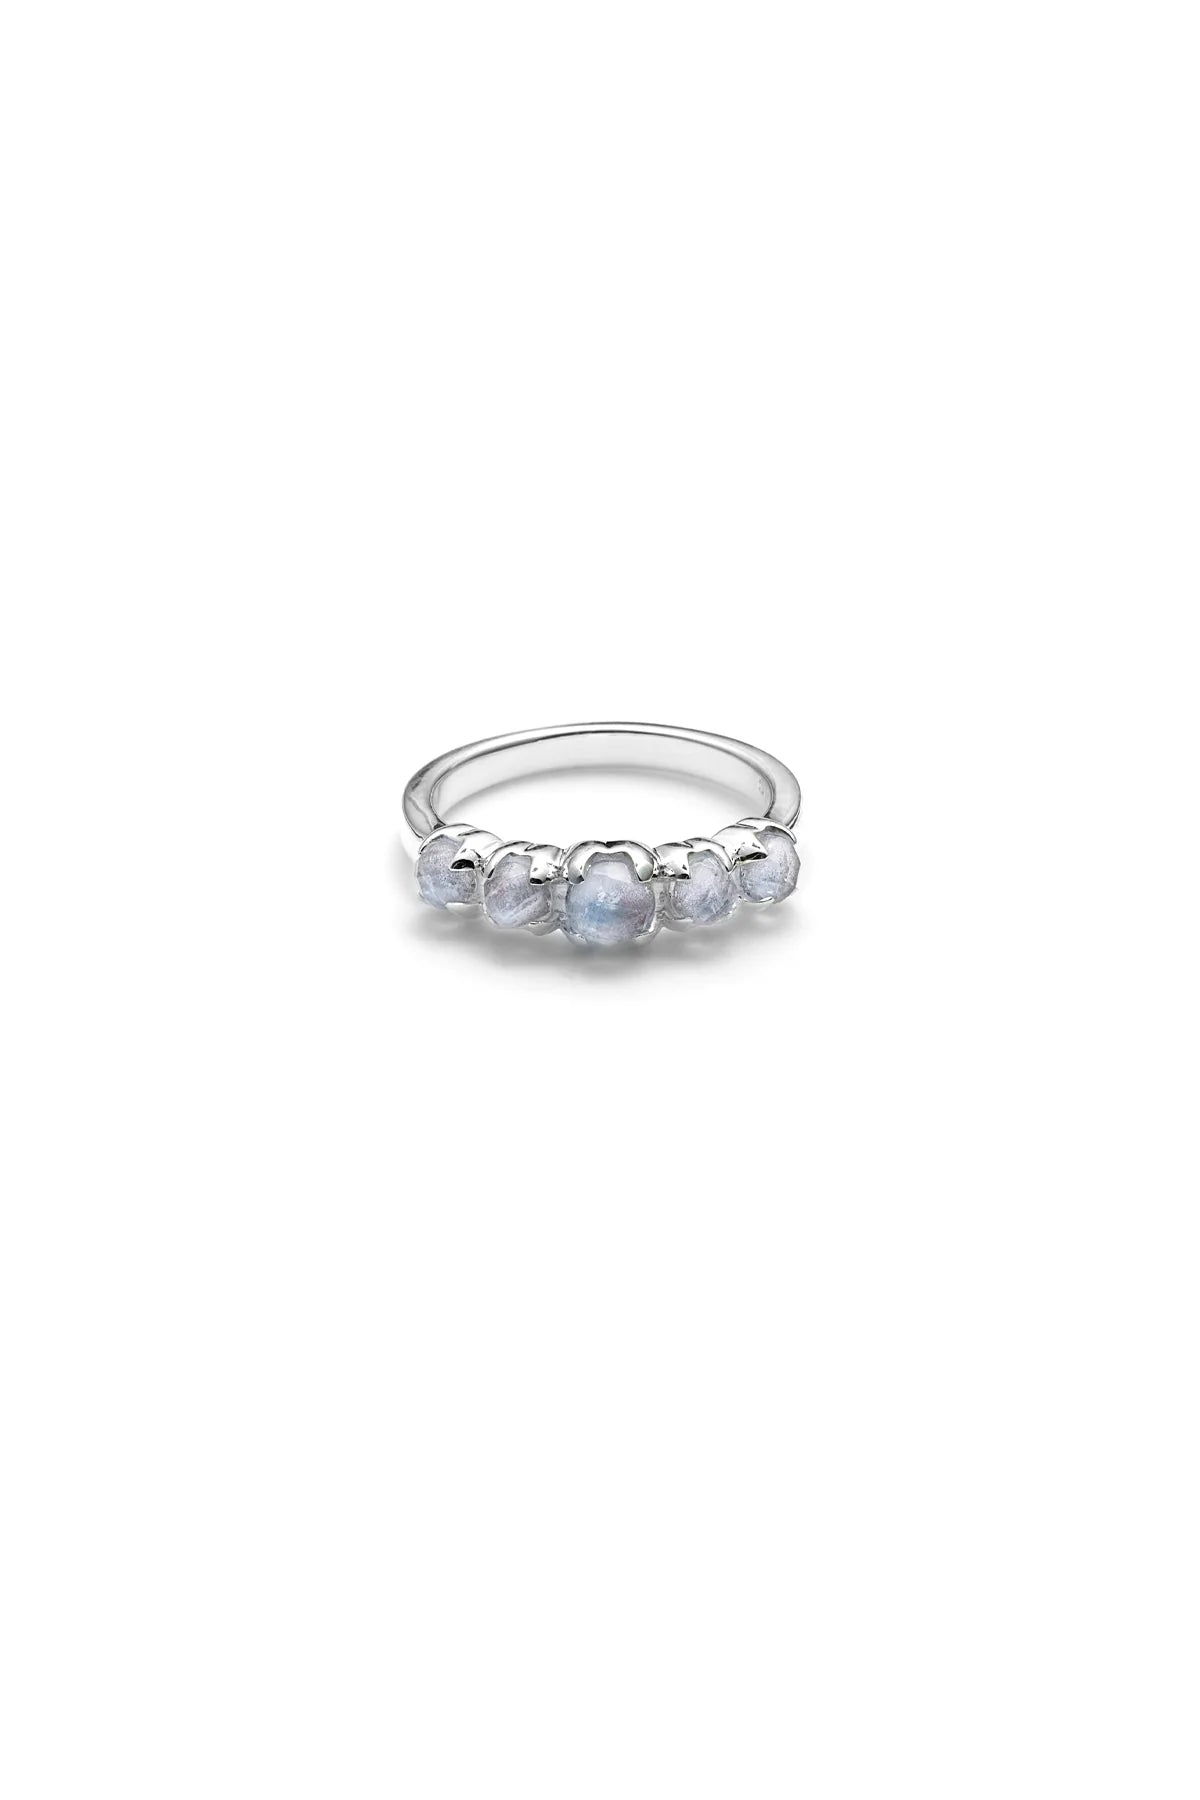 Halo Cluster Ring - Moonstone - Size N